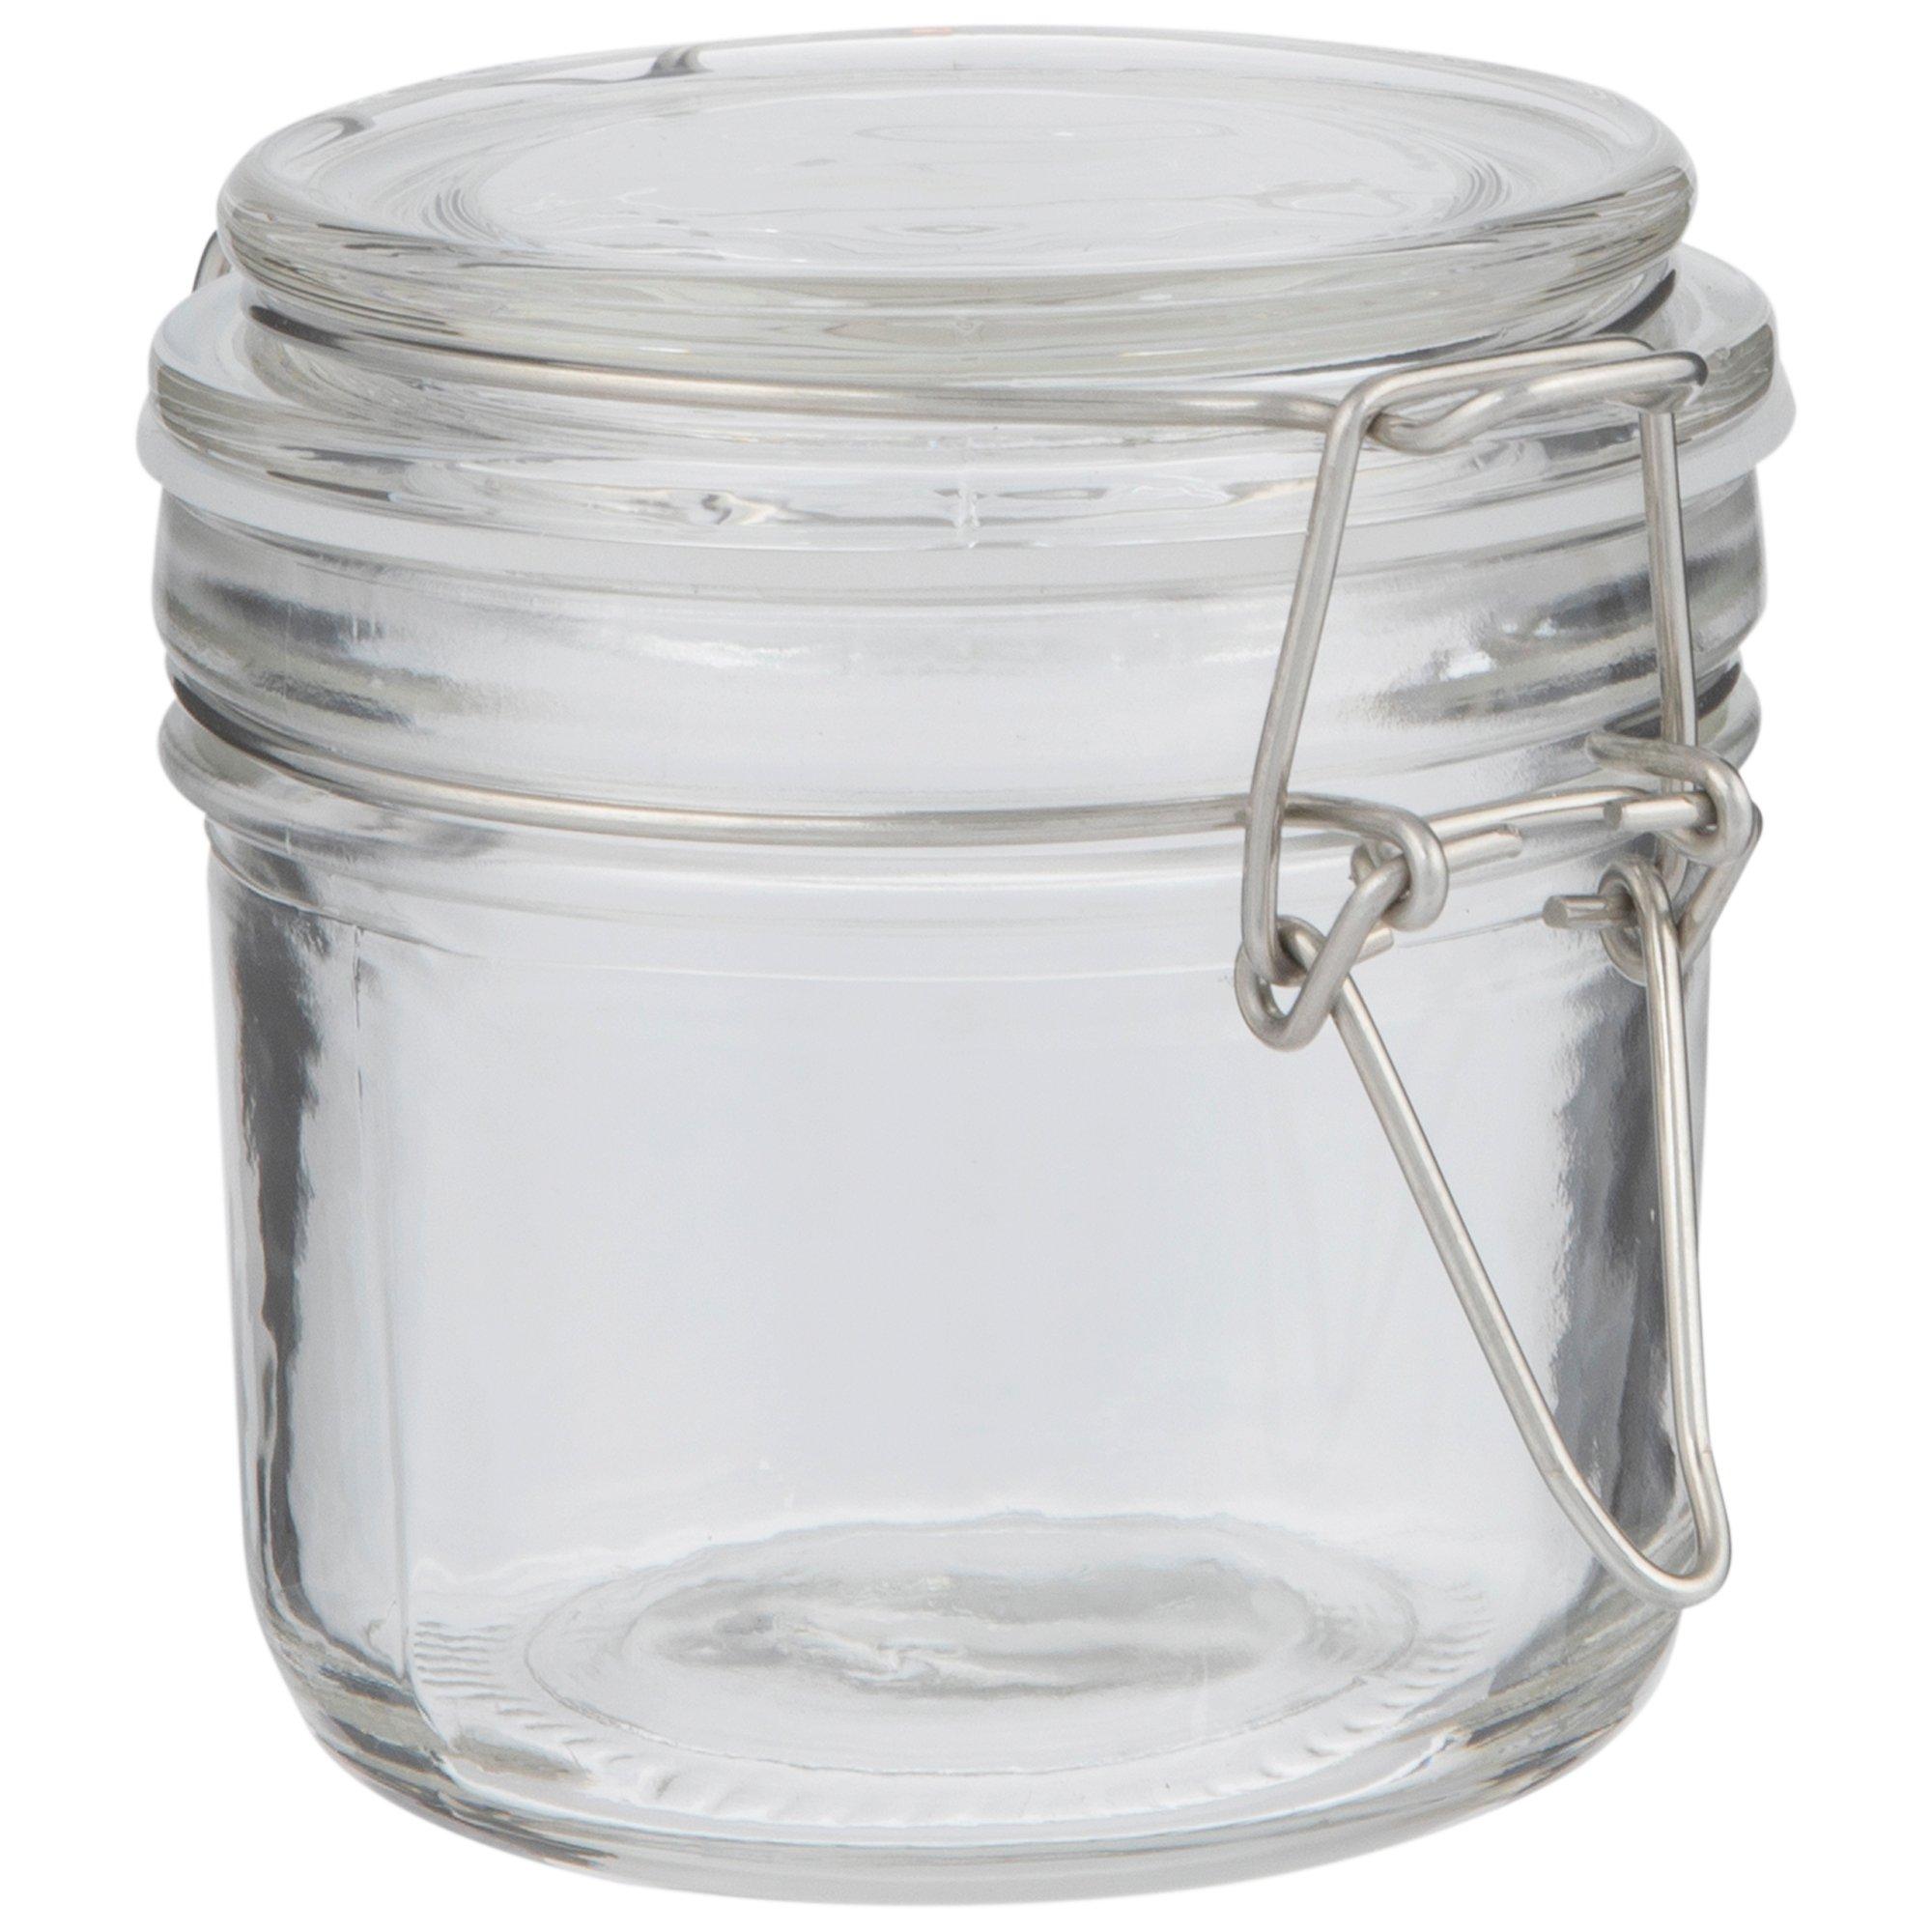 Money-Wise Market Clear Mini Round Jar with Silver Lid - Craft